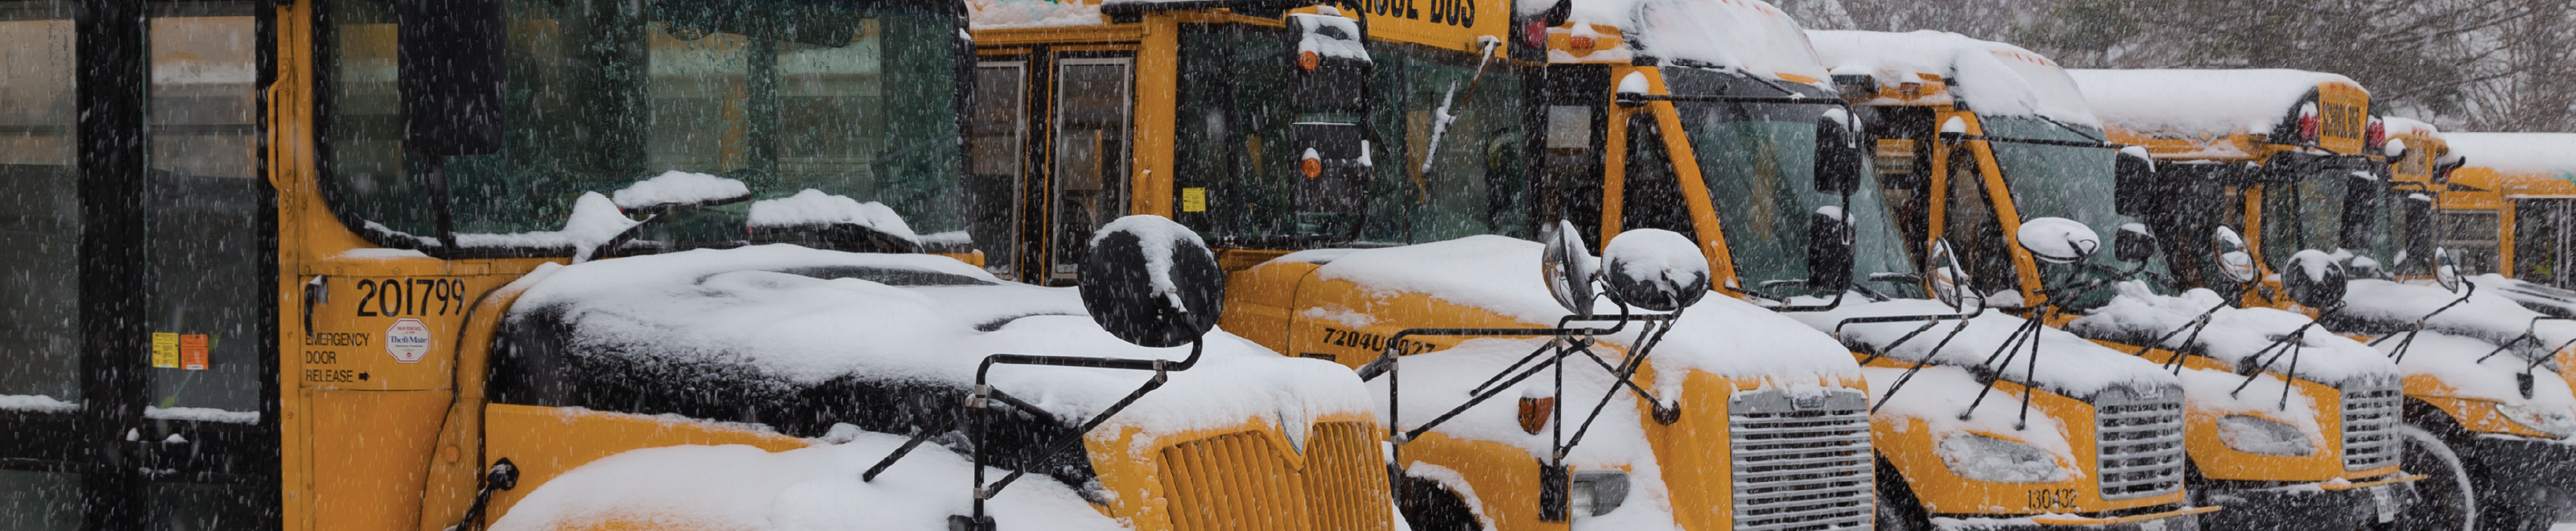 An image of 7 yellow school buses parking in the snow.